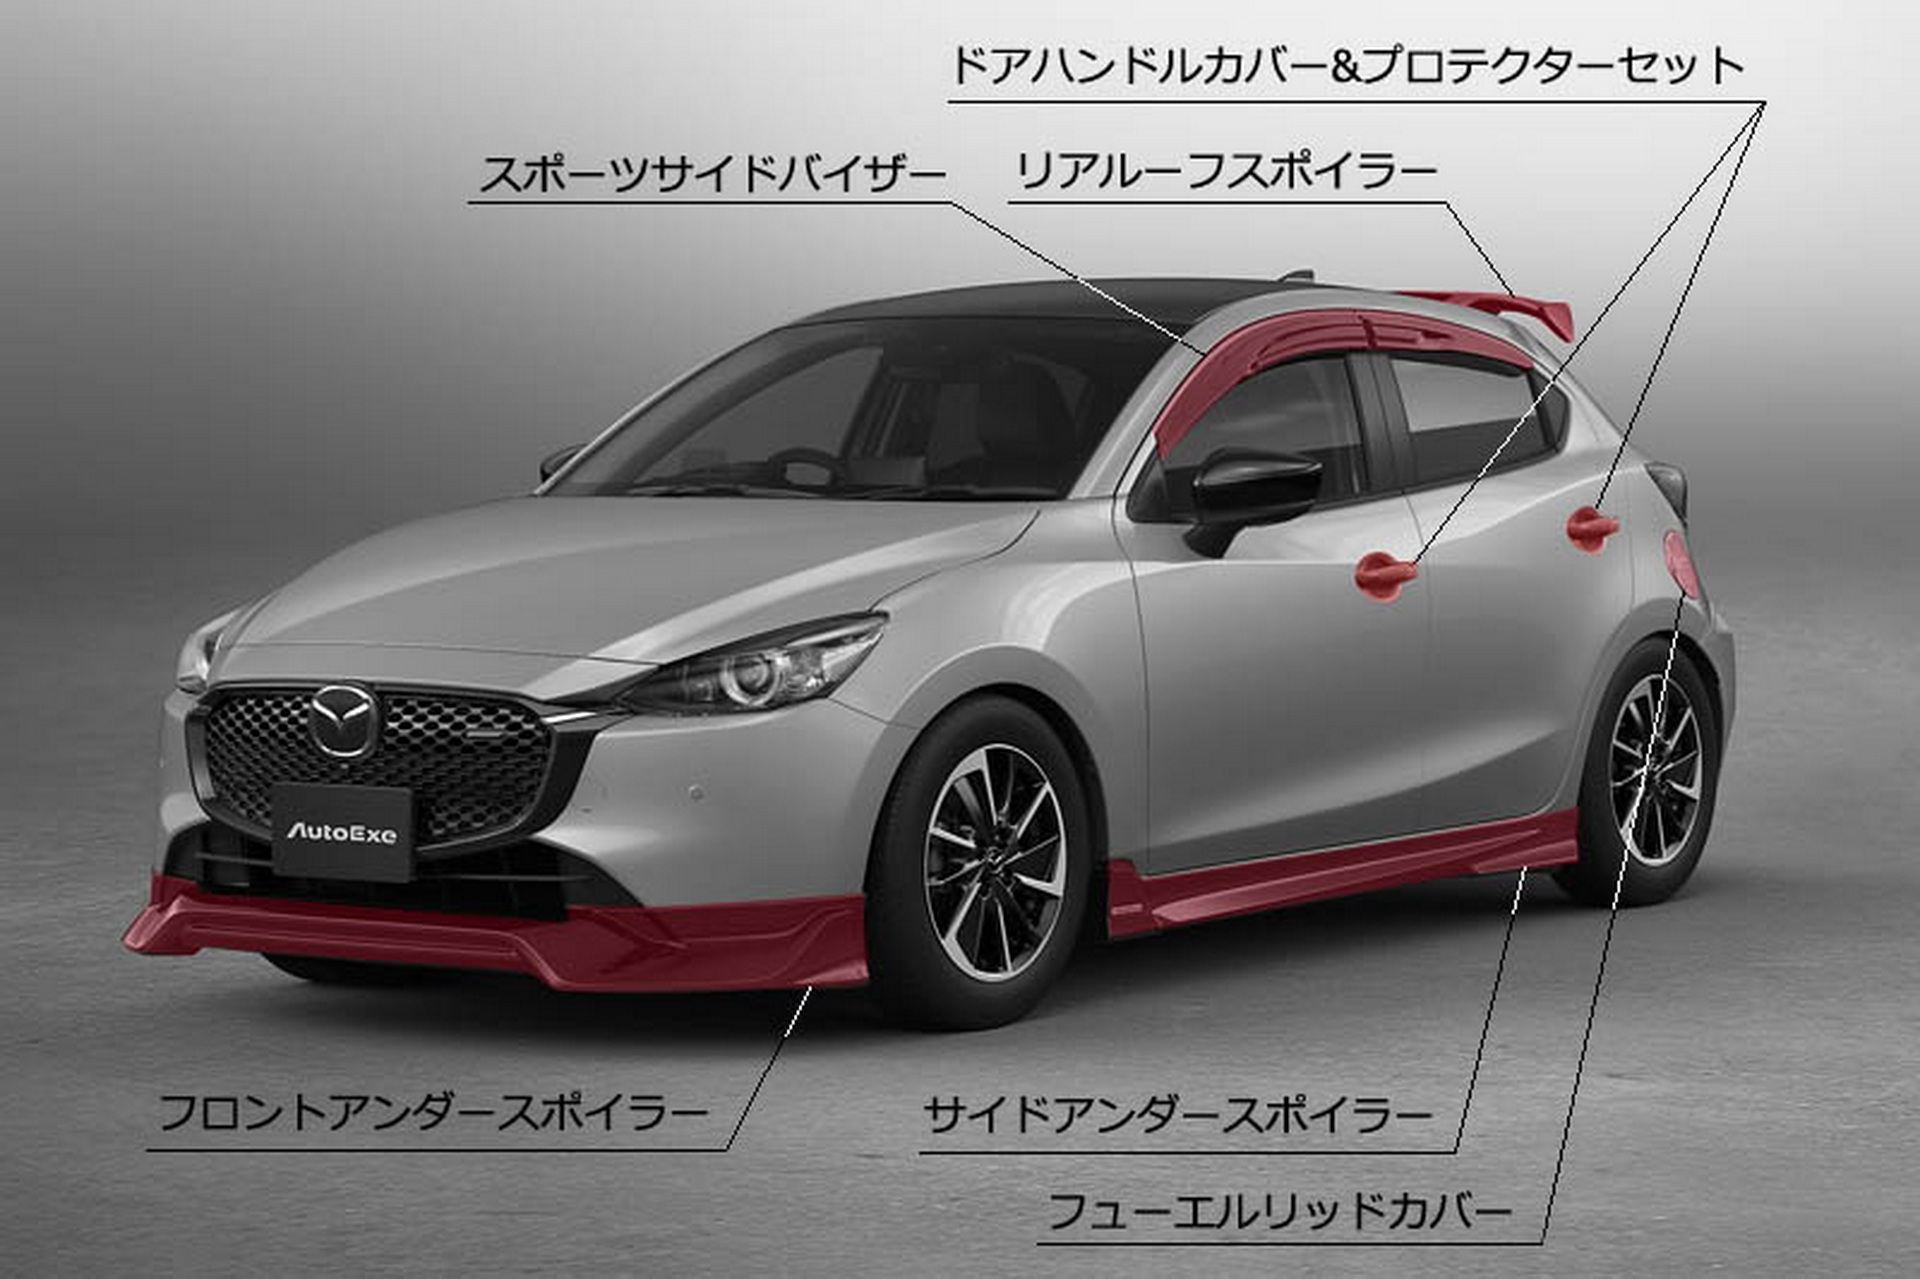 https://www.carscoops.com/wp-content/uploads/2023/01/Mazda2-by-Exe-Auto-1.jpg